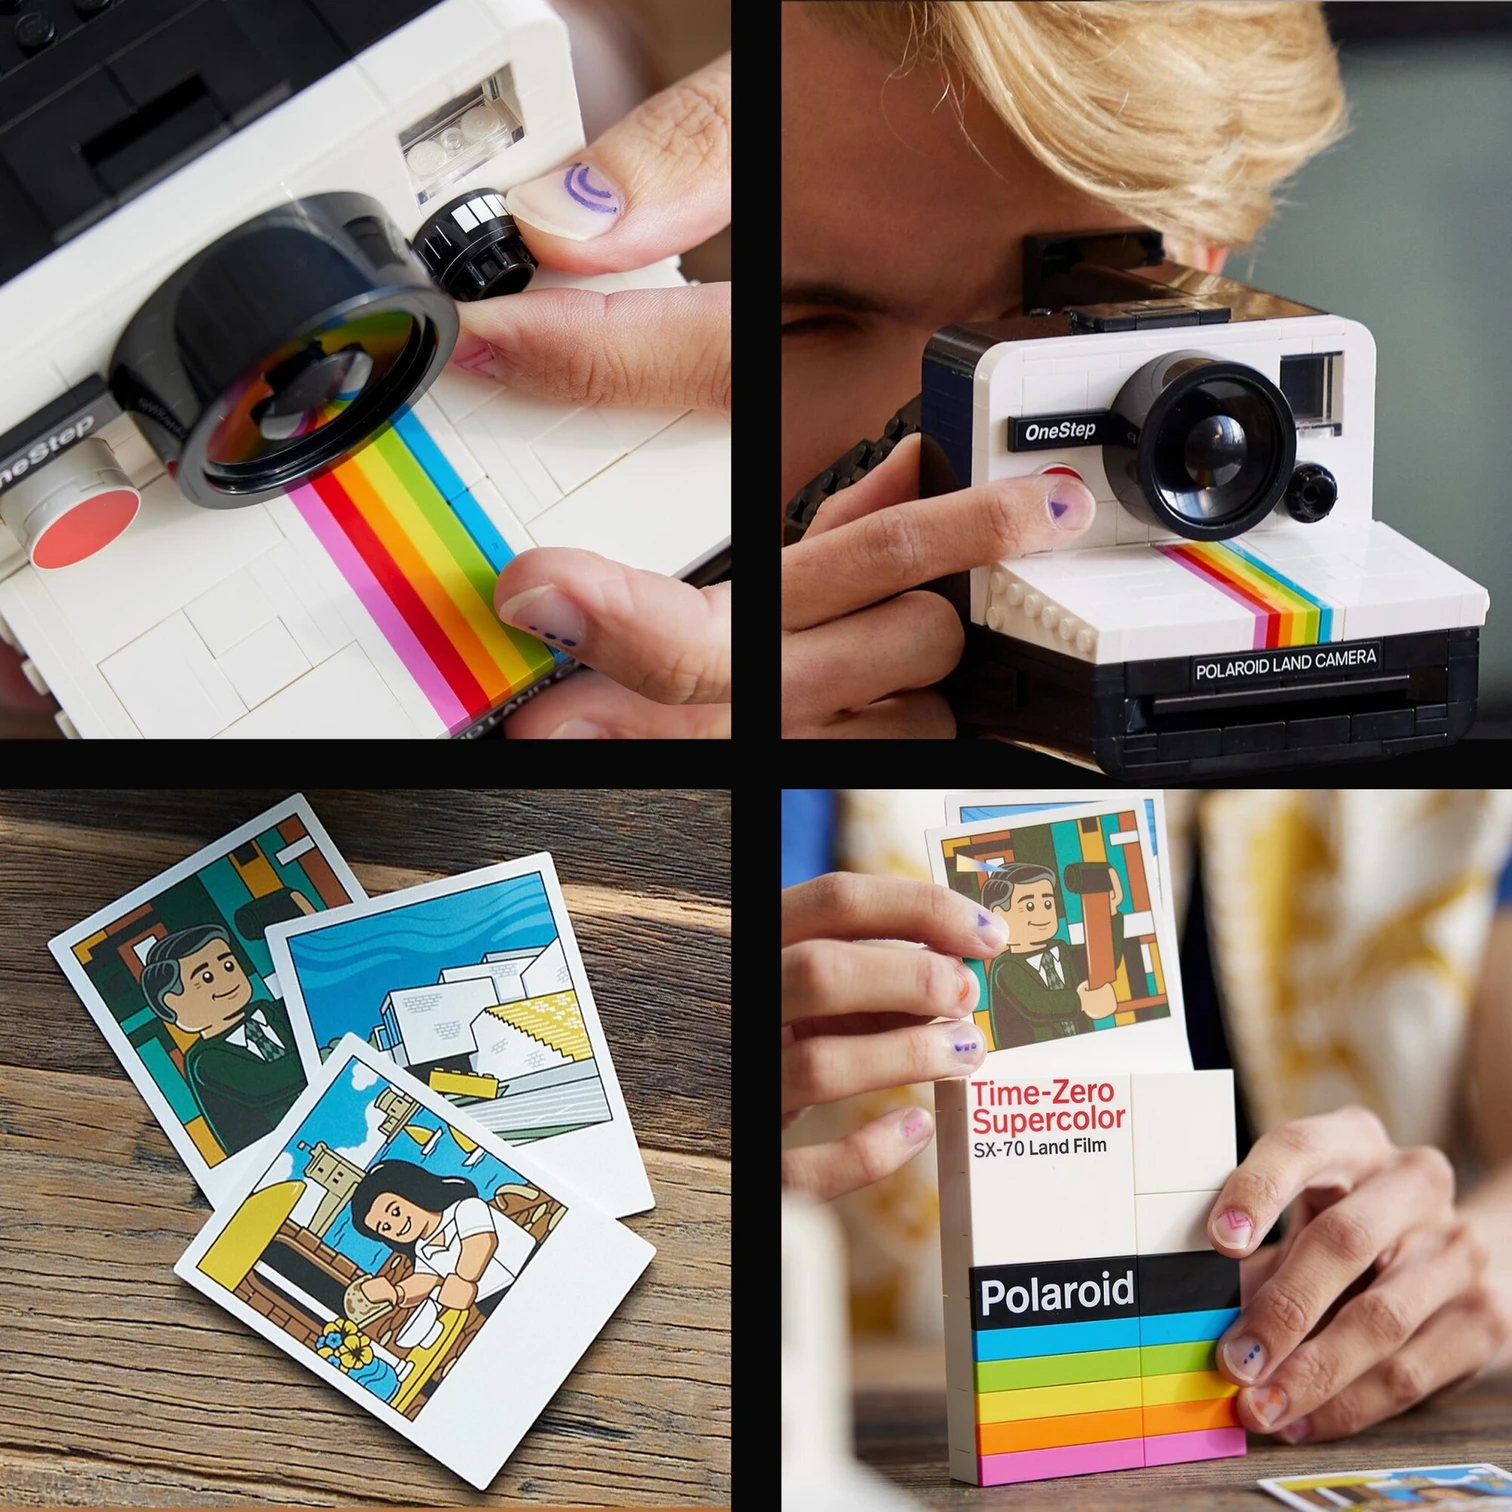 Lego Polaroid instant camera build completed and in the hand